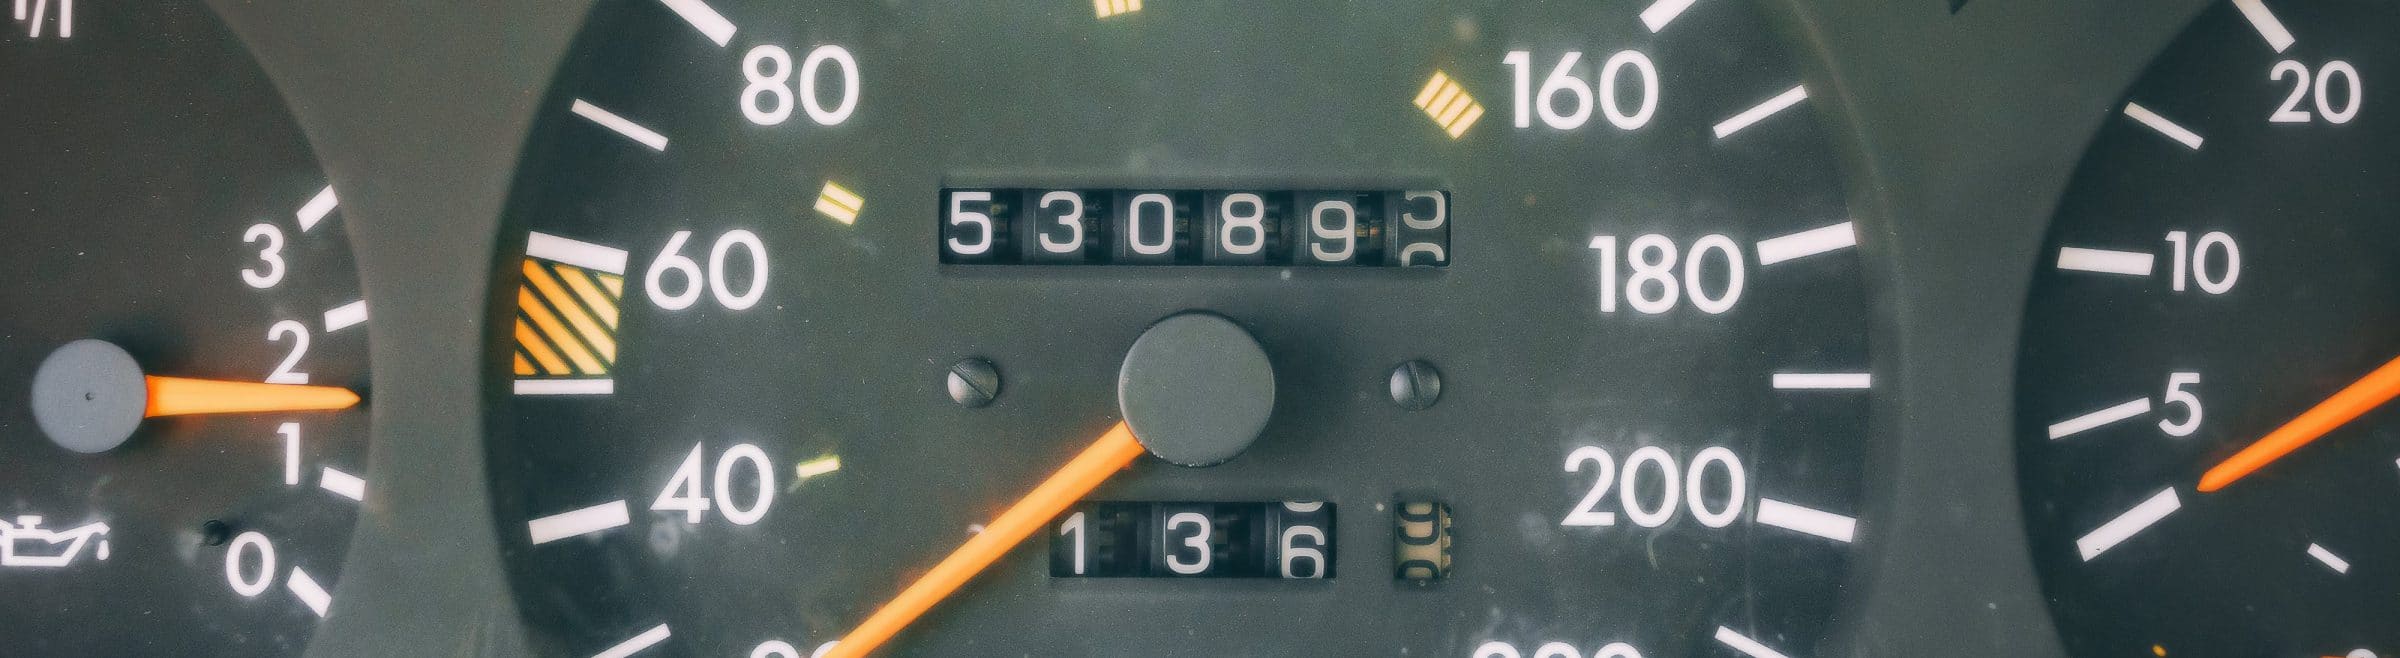 Dashboard closeup with visible speedometer and fuel level